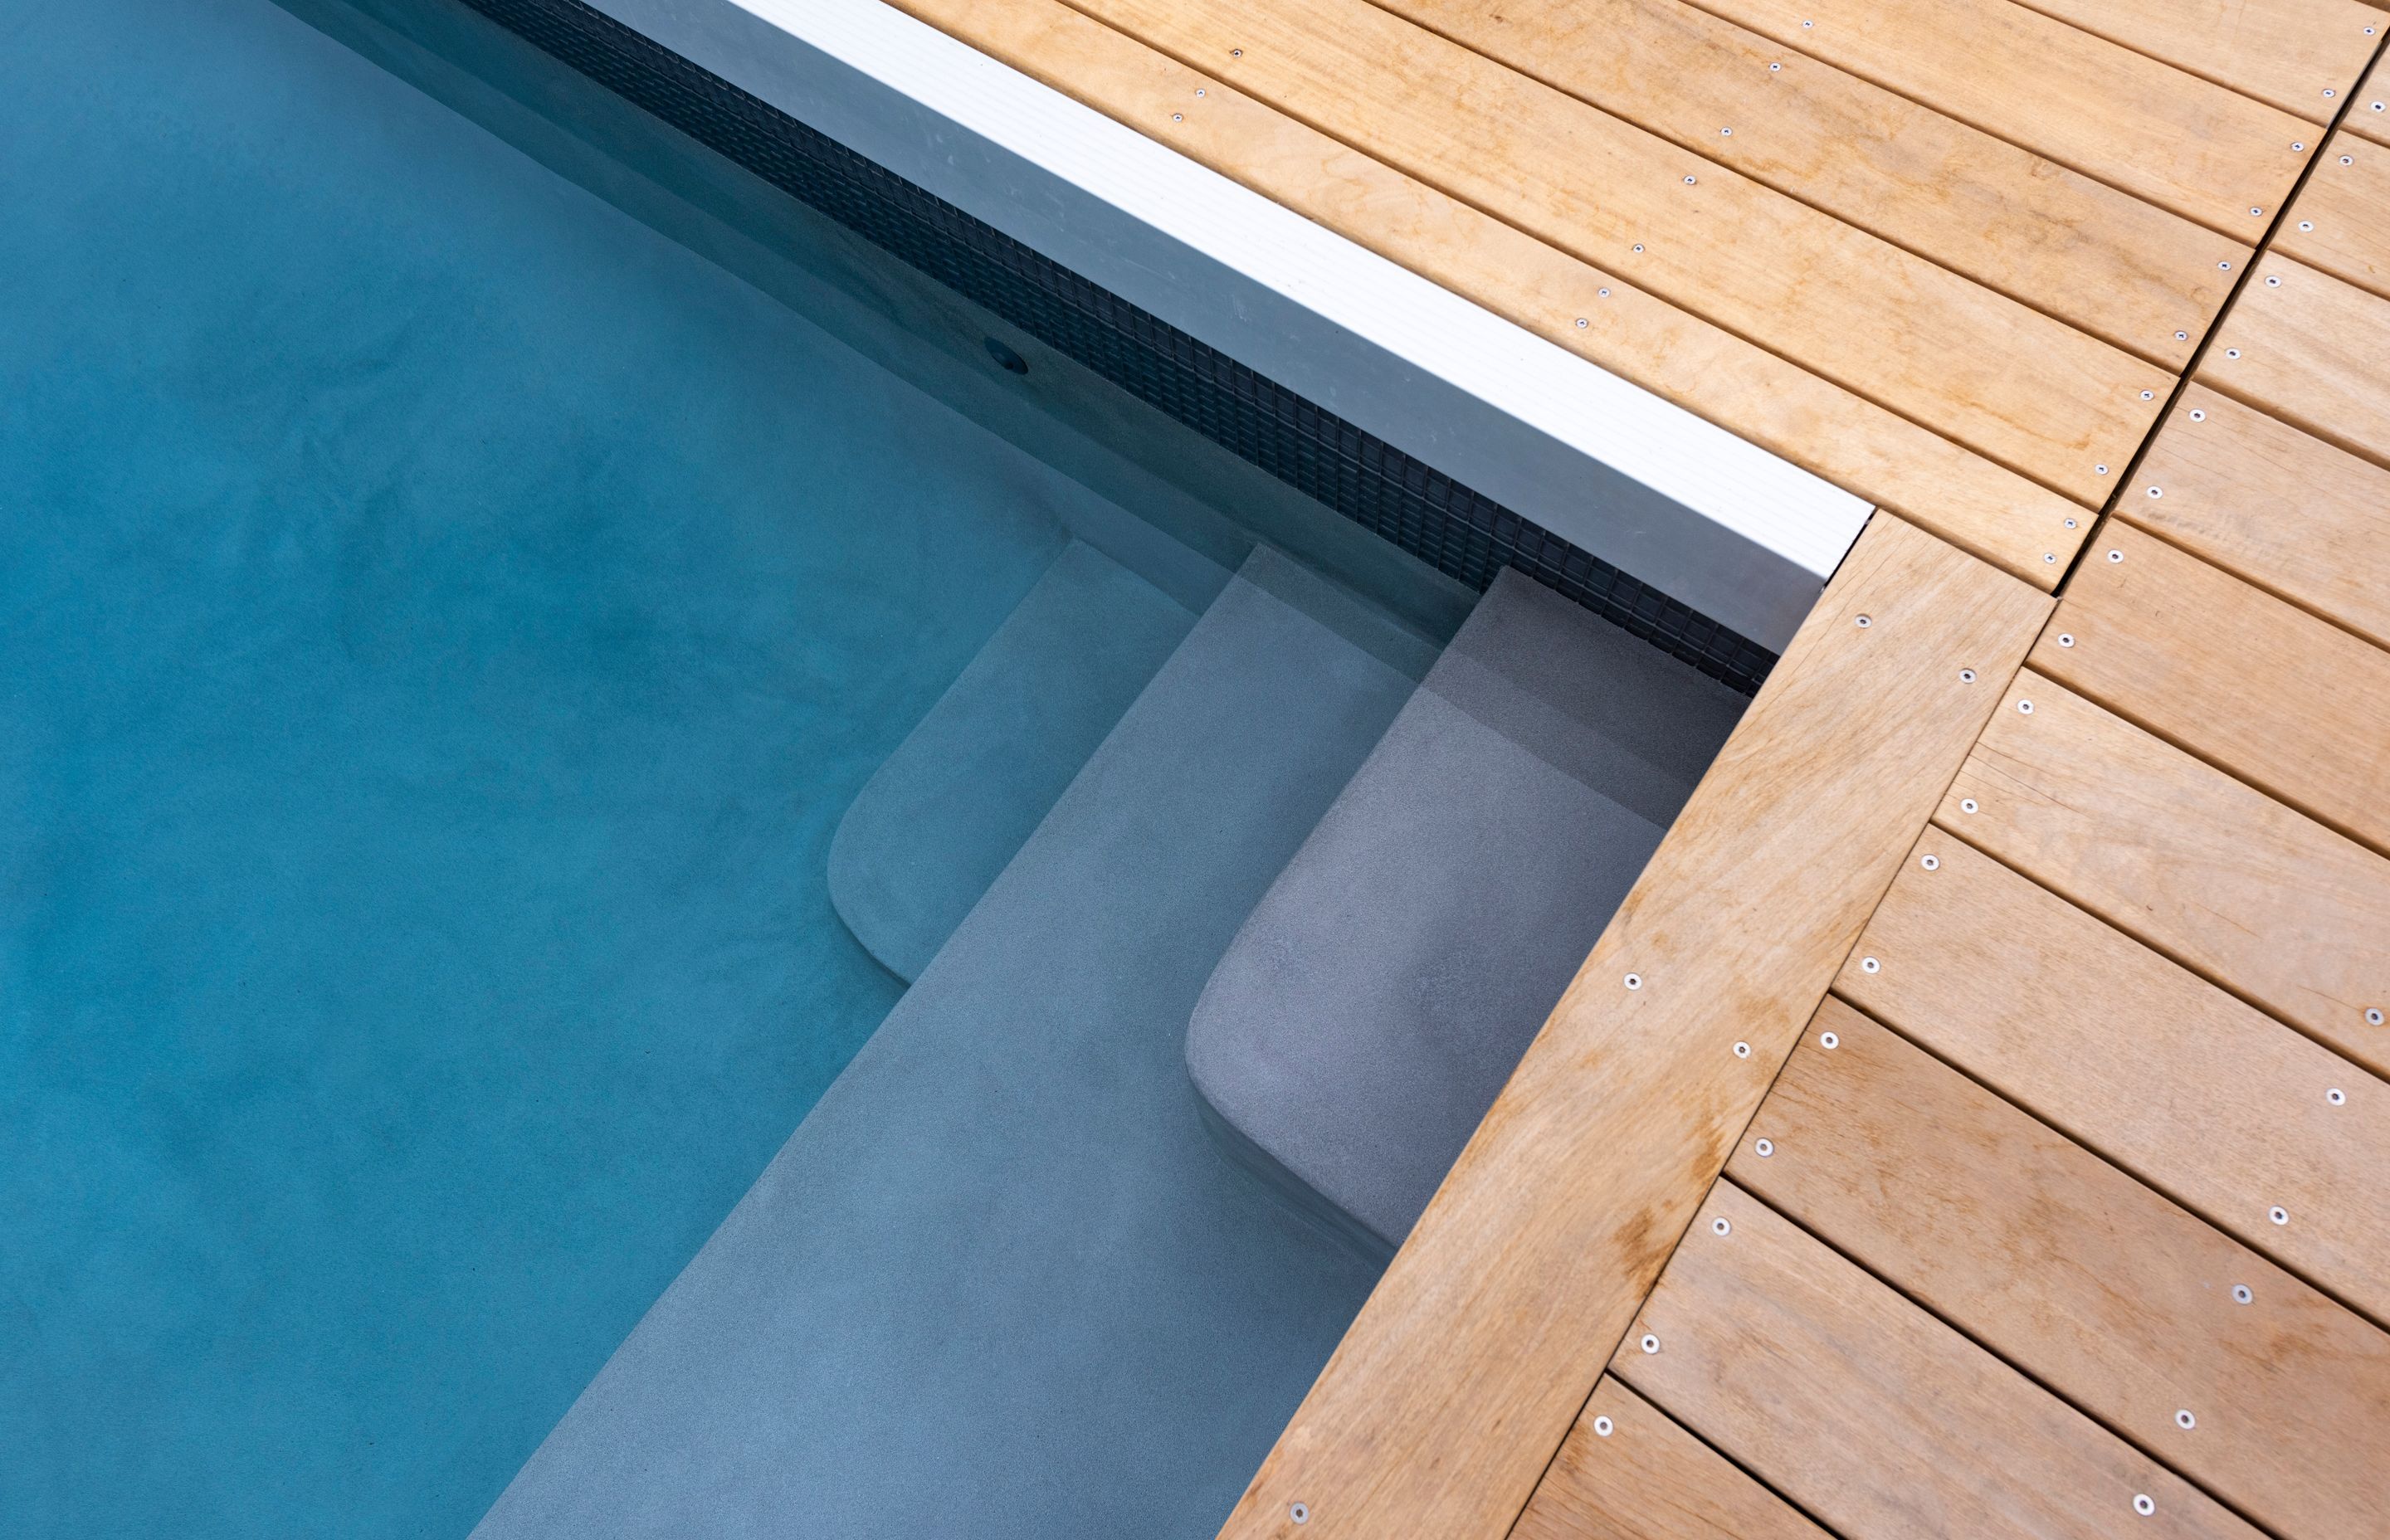 What to expect from your custom concrete pool